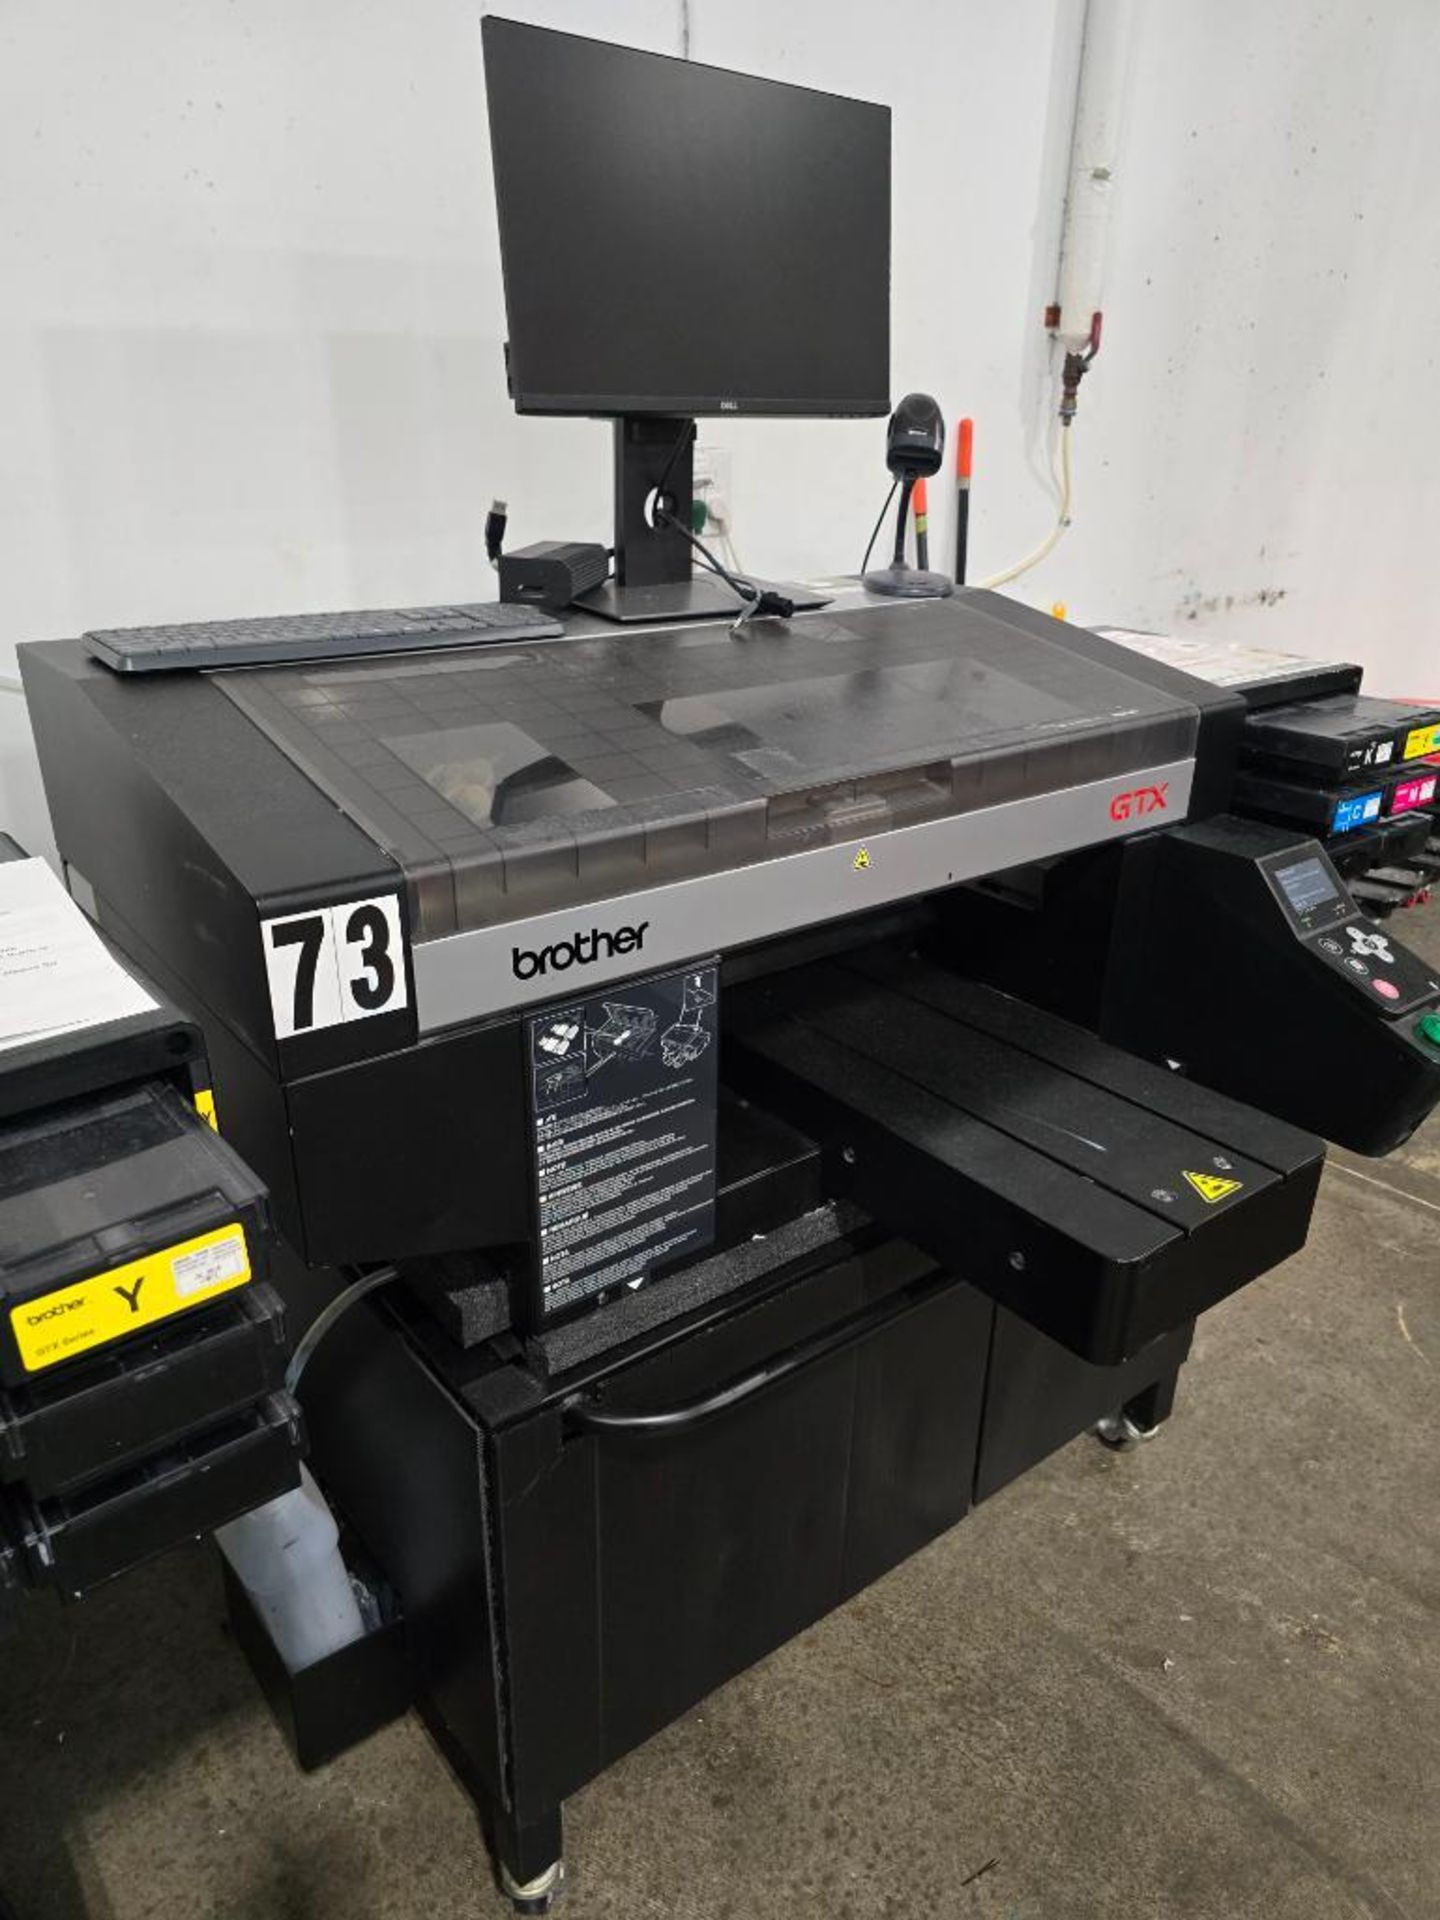 2018 Brother GTX-422 DTG (Direct to Garment) Printer, Twin Head, 6-Color, Textile & Water Based Pigm - Image 3 of 7